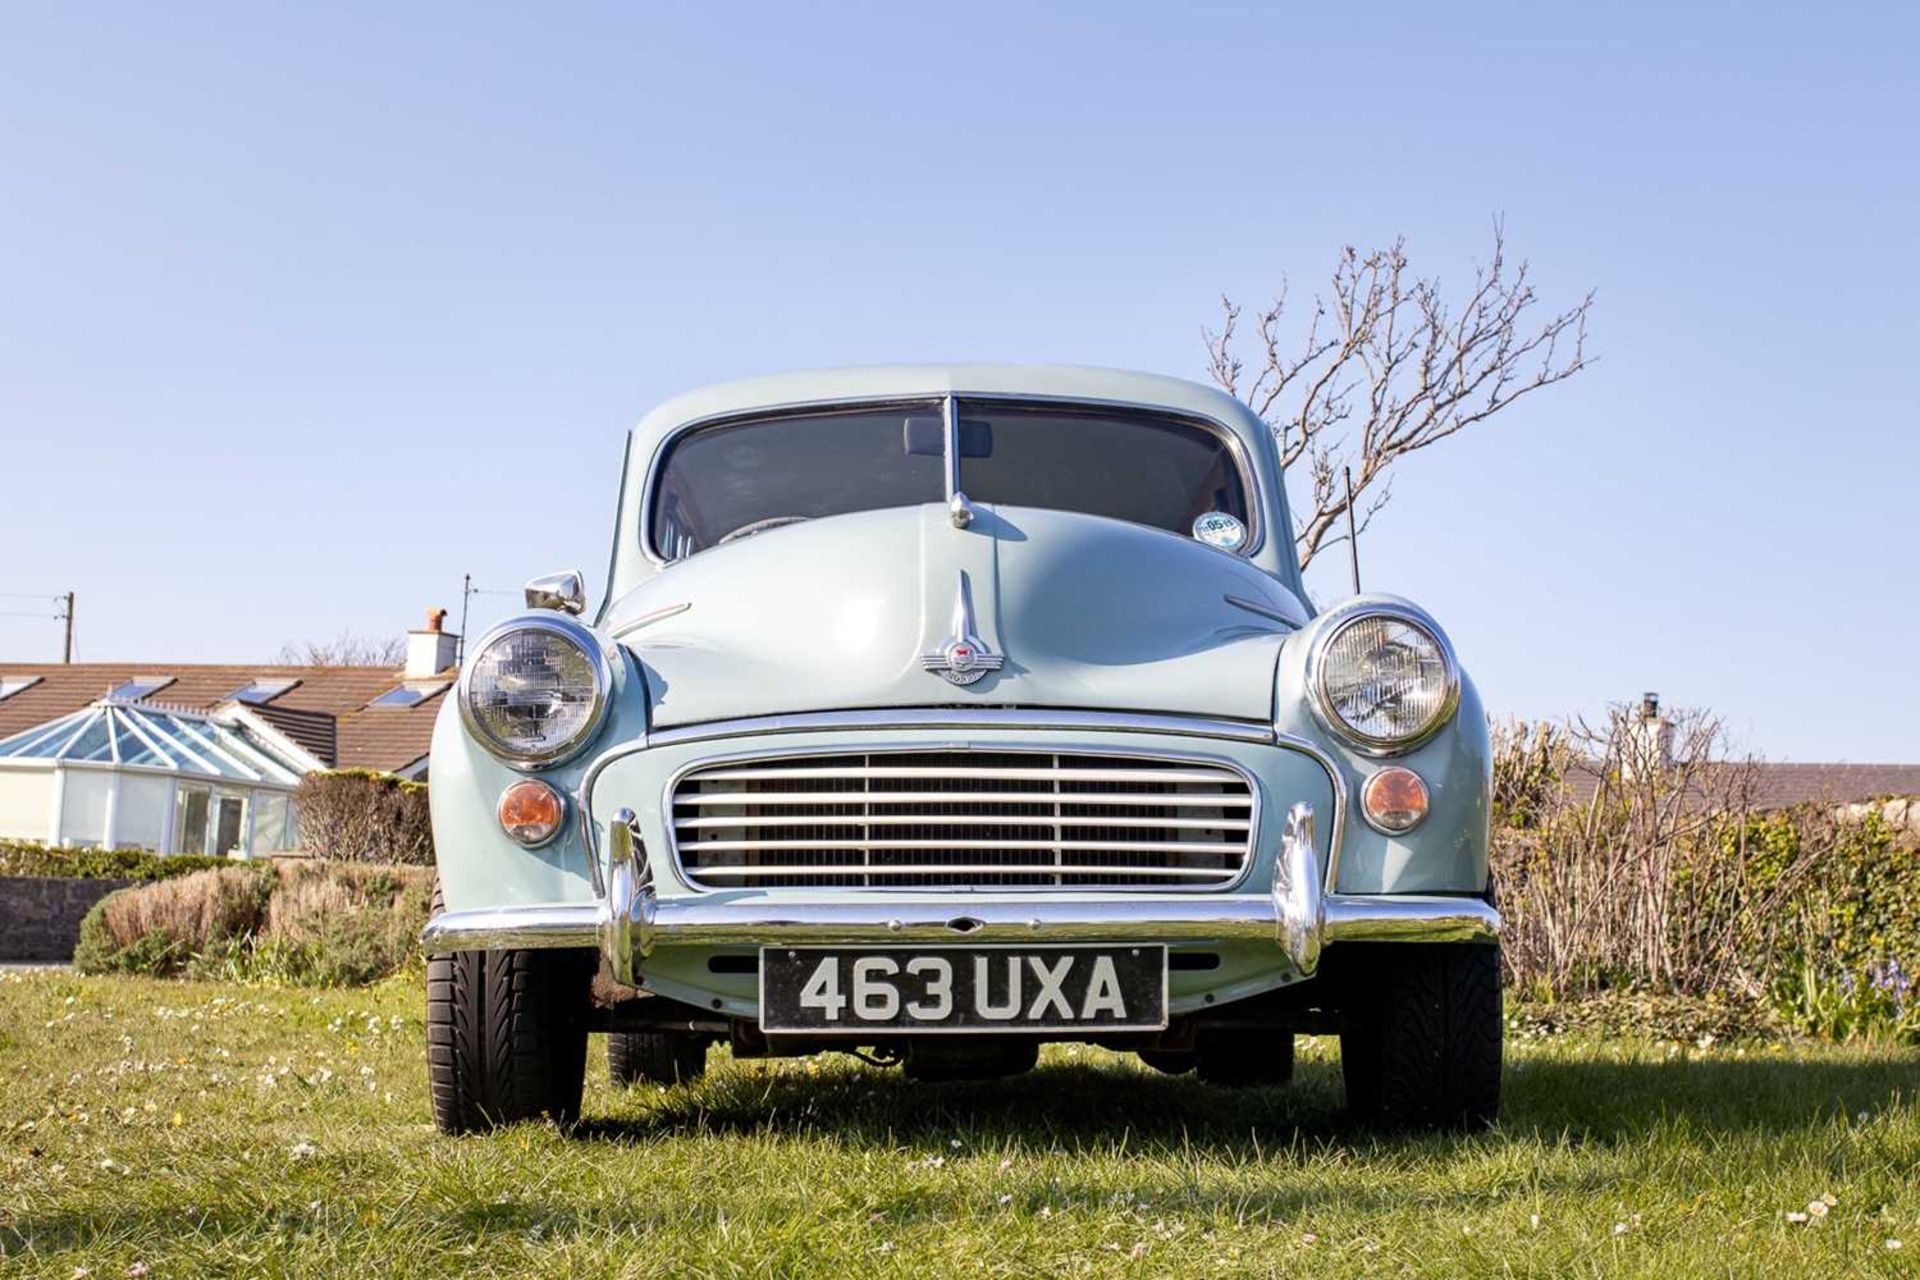 1956 Morris Minor Traveller Uprated with 1275cc engine  - Image 20 of 89